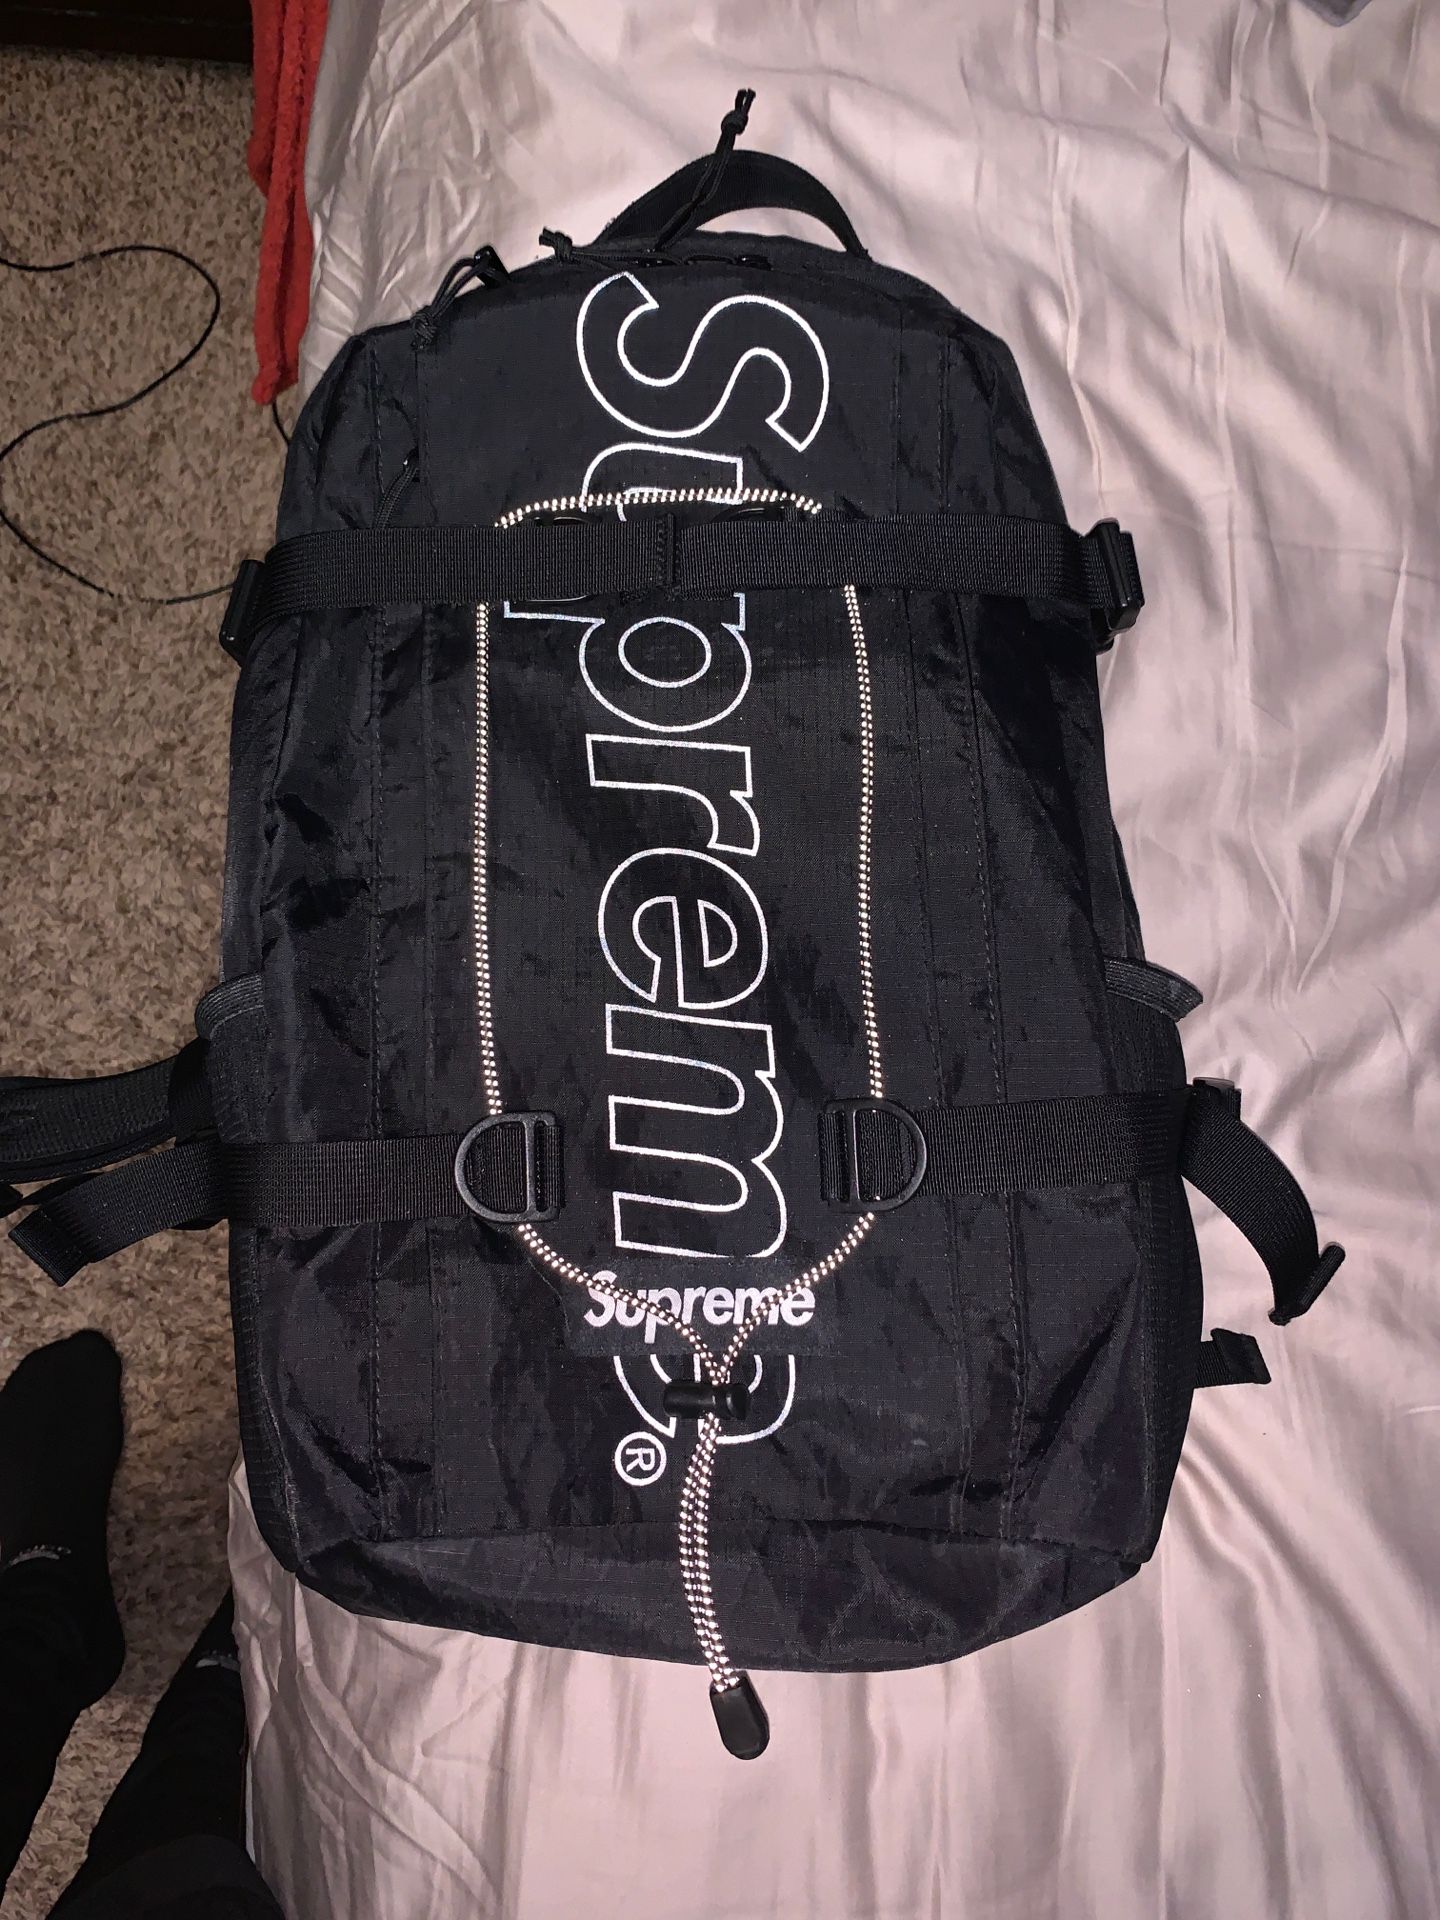 Supreme backpack (FW18) for Sale in Oak Lawn, IL - OfferUp